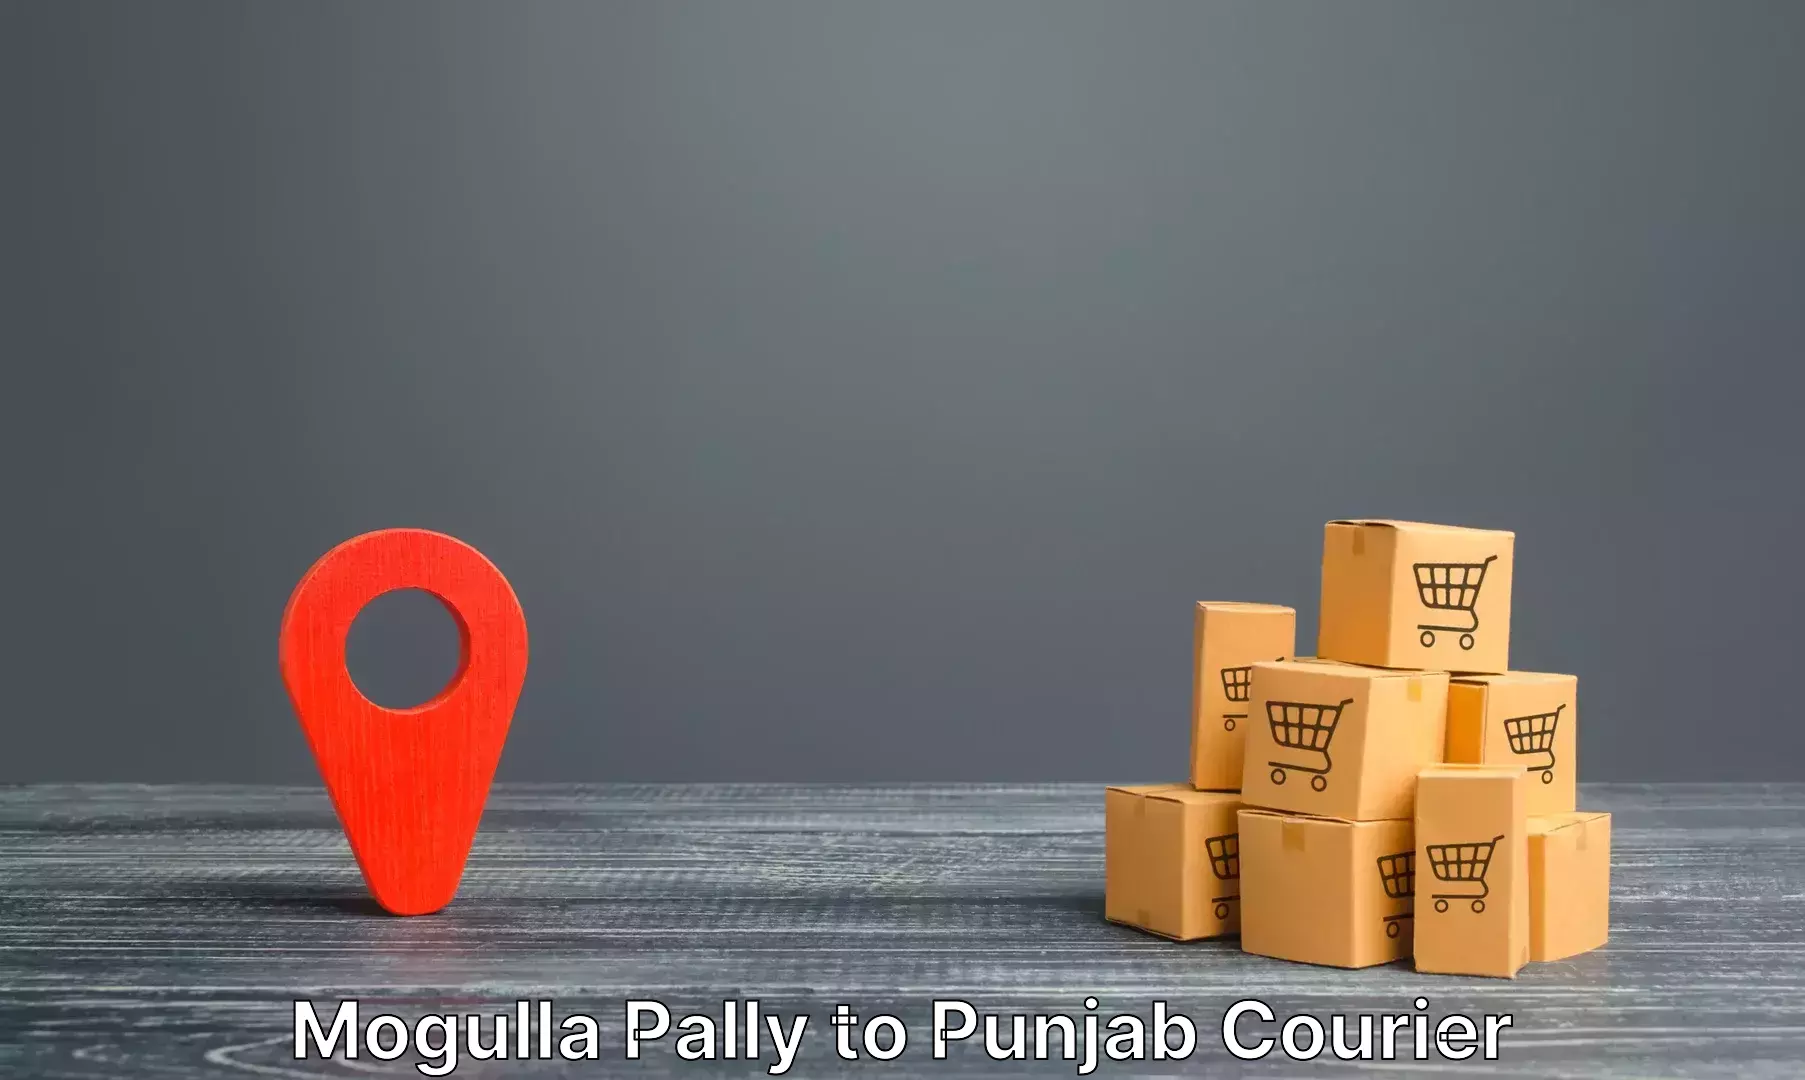 Luggage delivery providers Mogulla Pally to Punjab